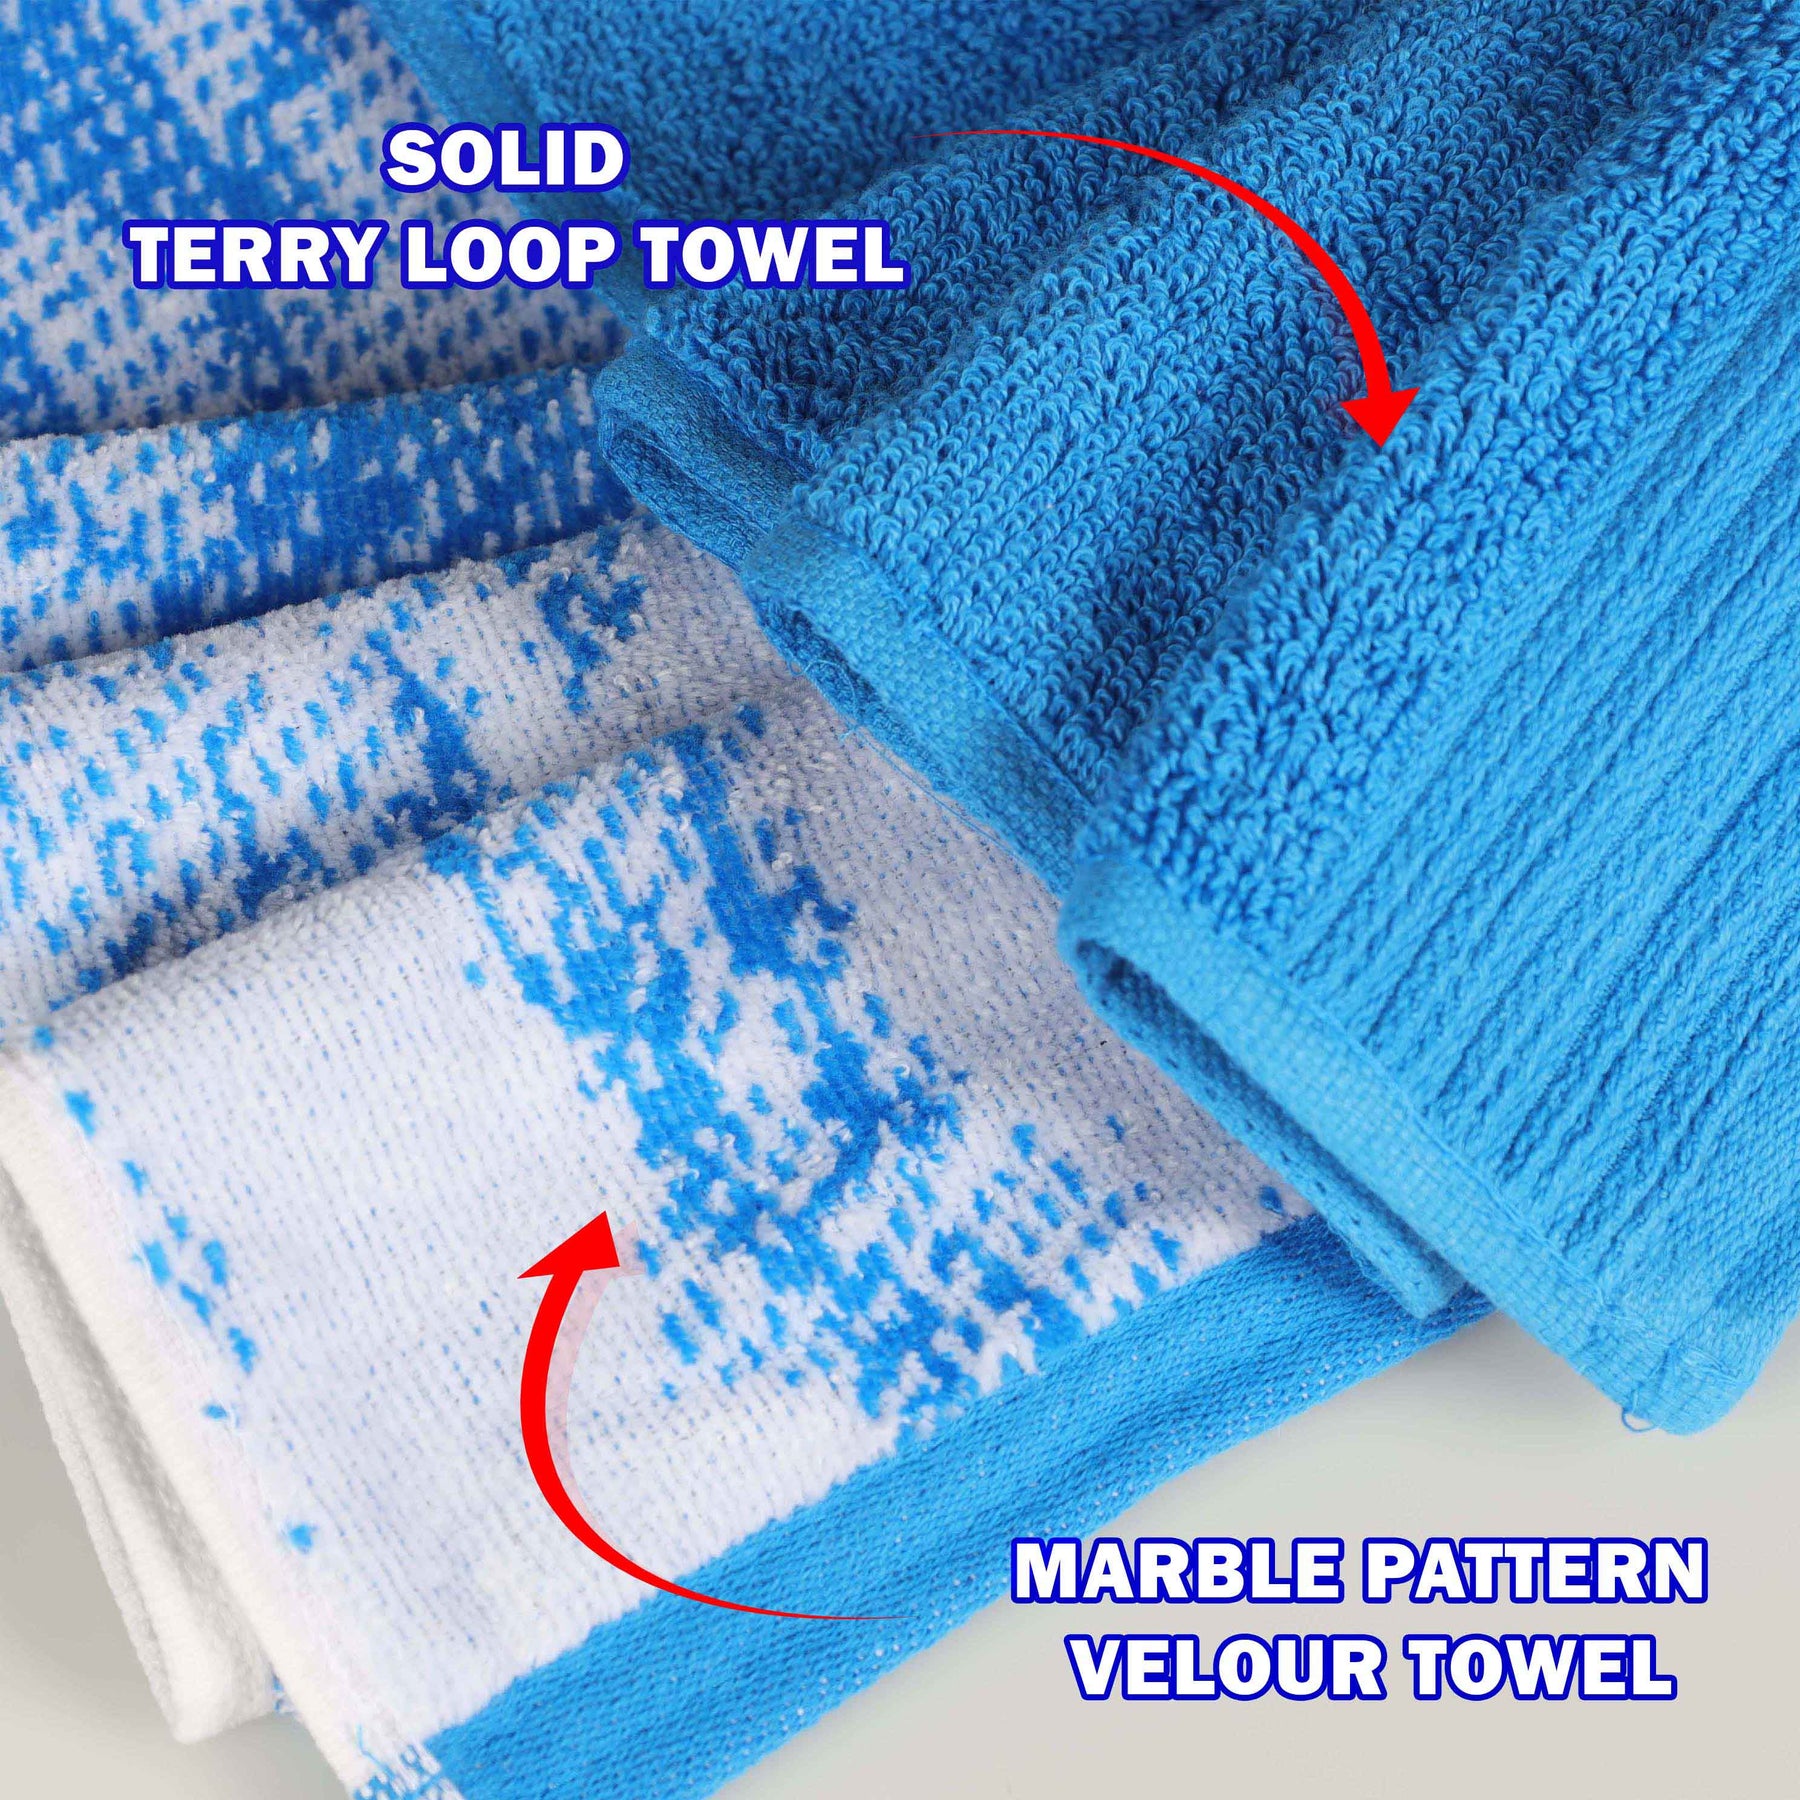 Cotton Marble and Solid Quick Dry 10 Piece Assorted Bathroom Towel Set - Blue